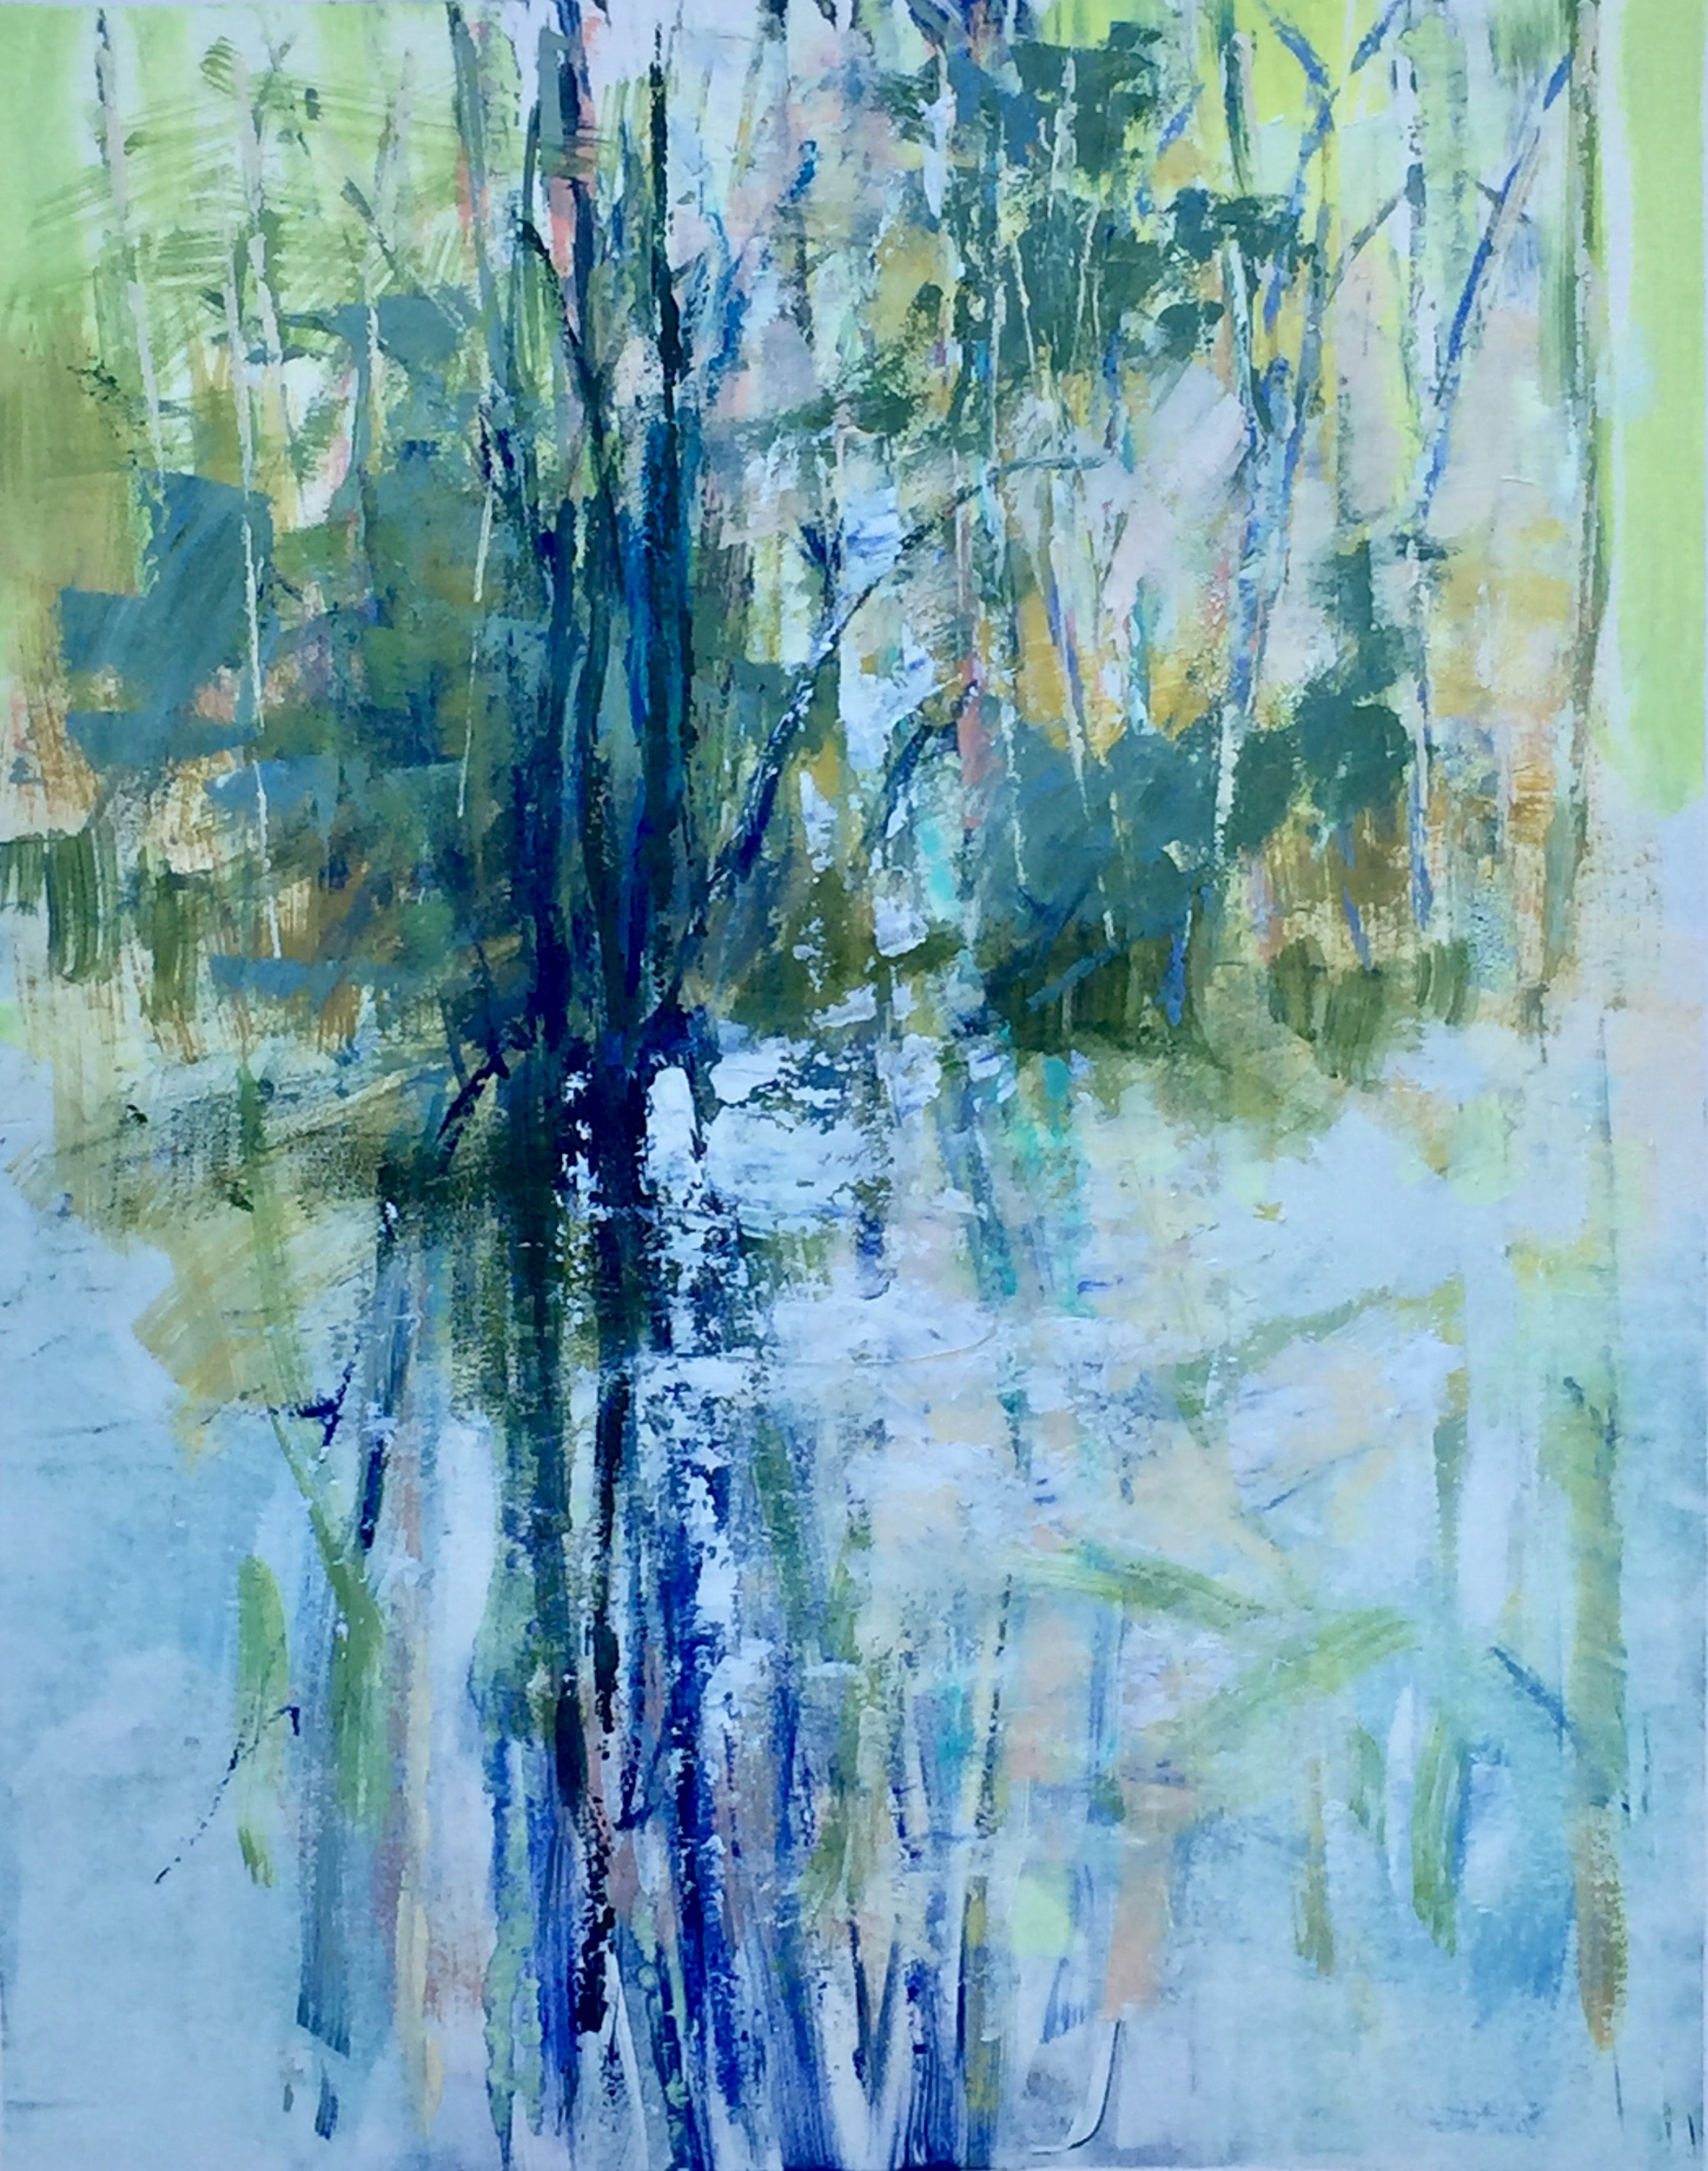 Pond Serenity by Susan Colwell